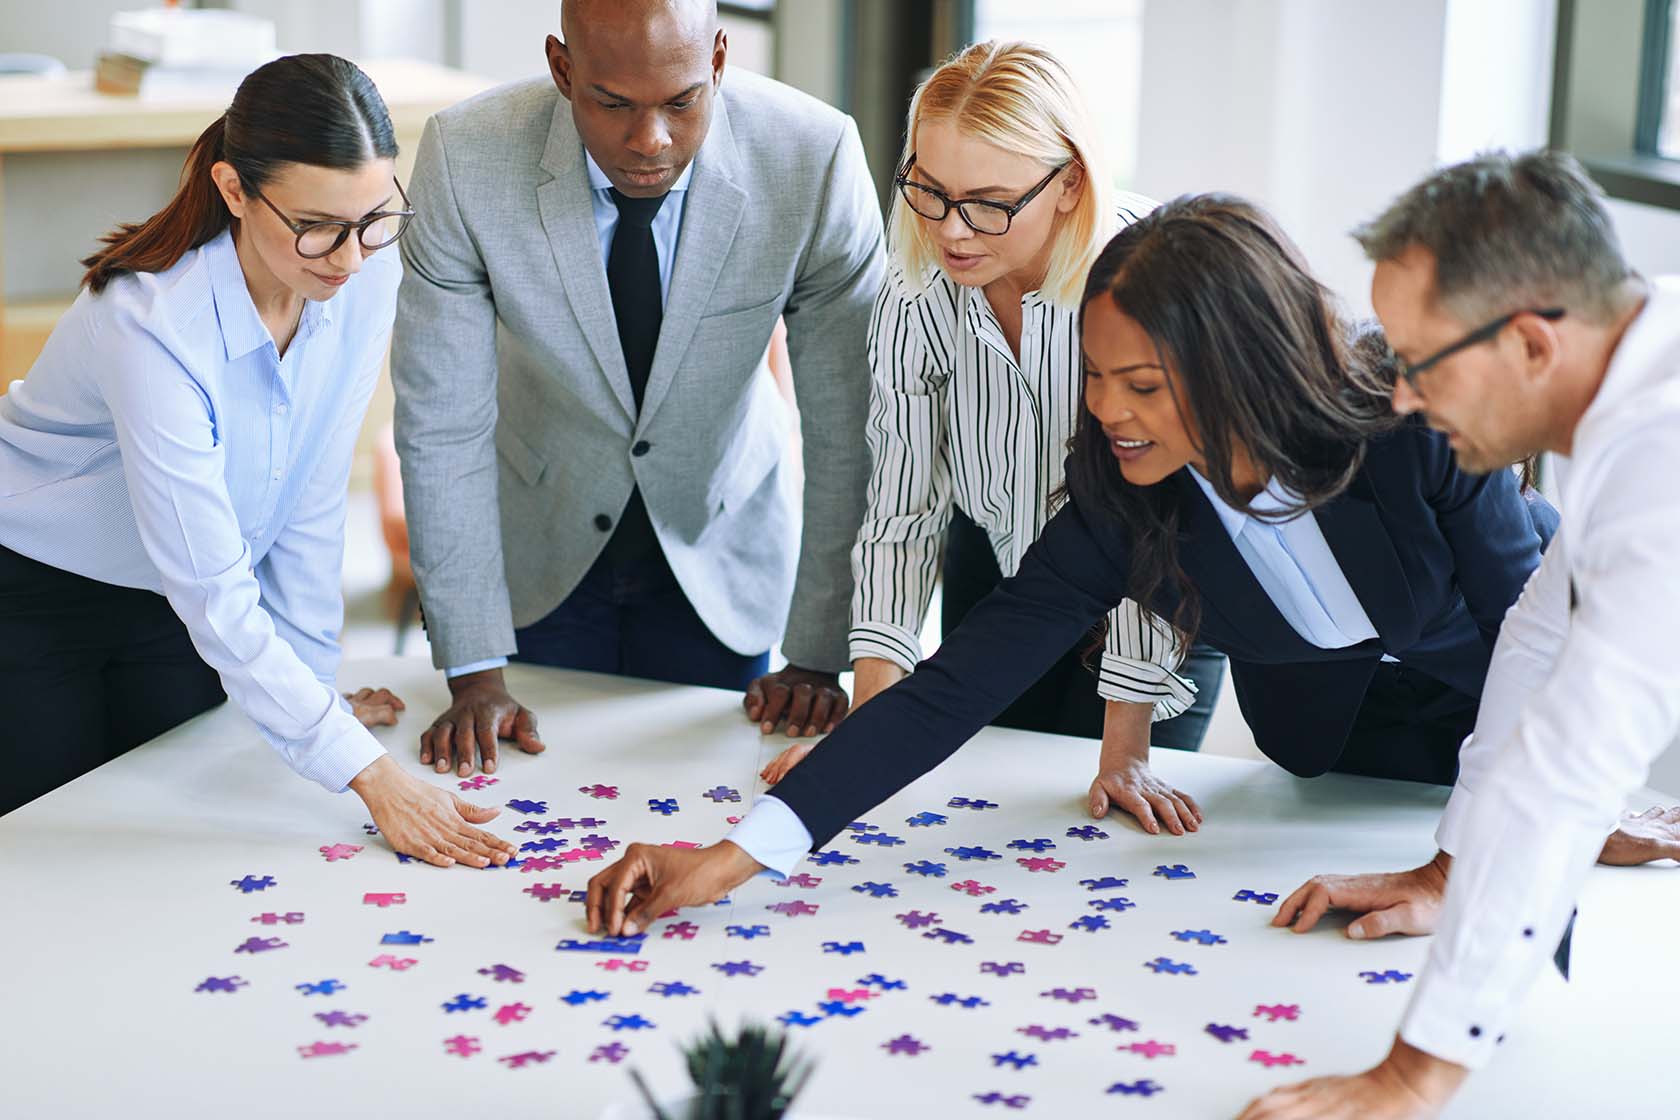 Diverse Team of Employees Working on a Puzzle in the Office to Build Teamwork